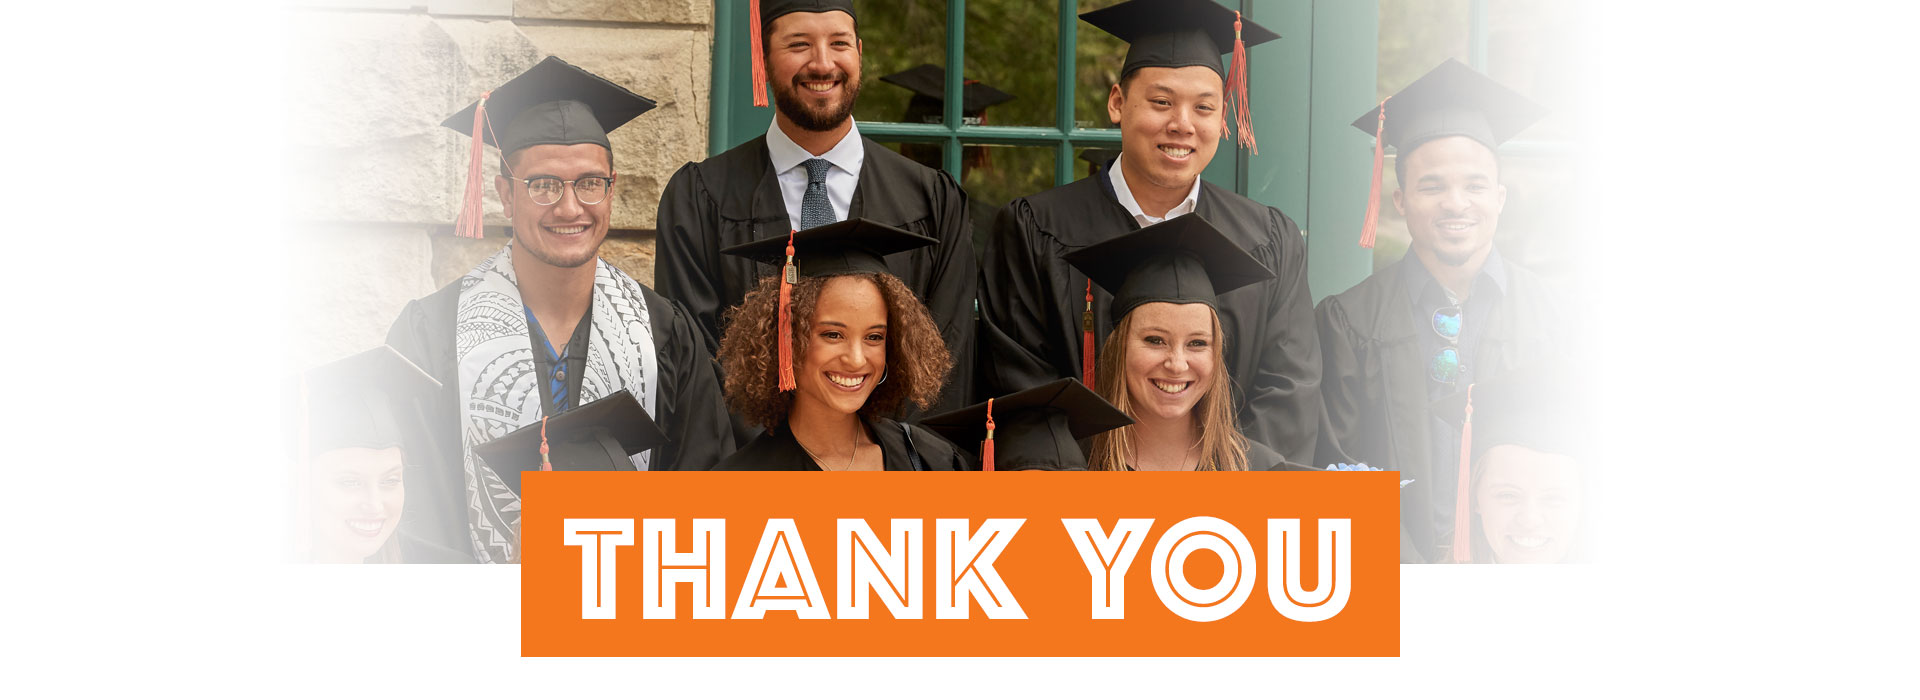 Graduate students in caps and gowns smiling with a thank you banner